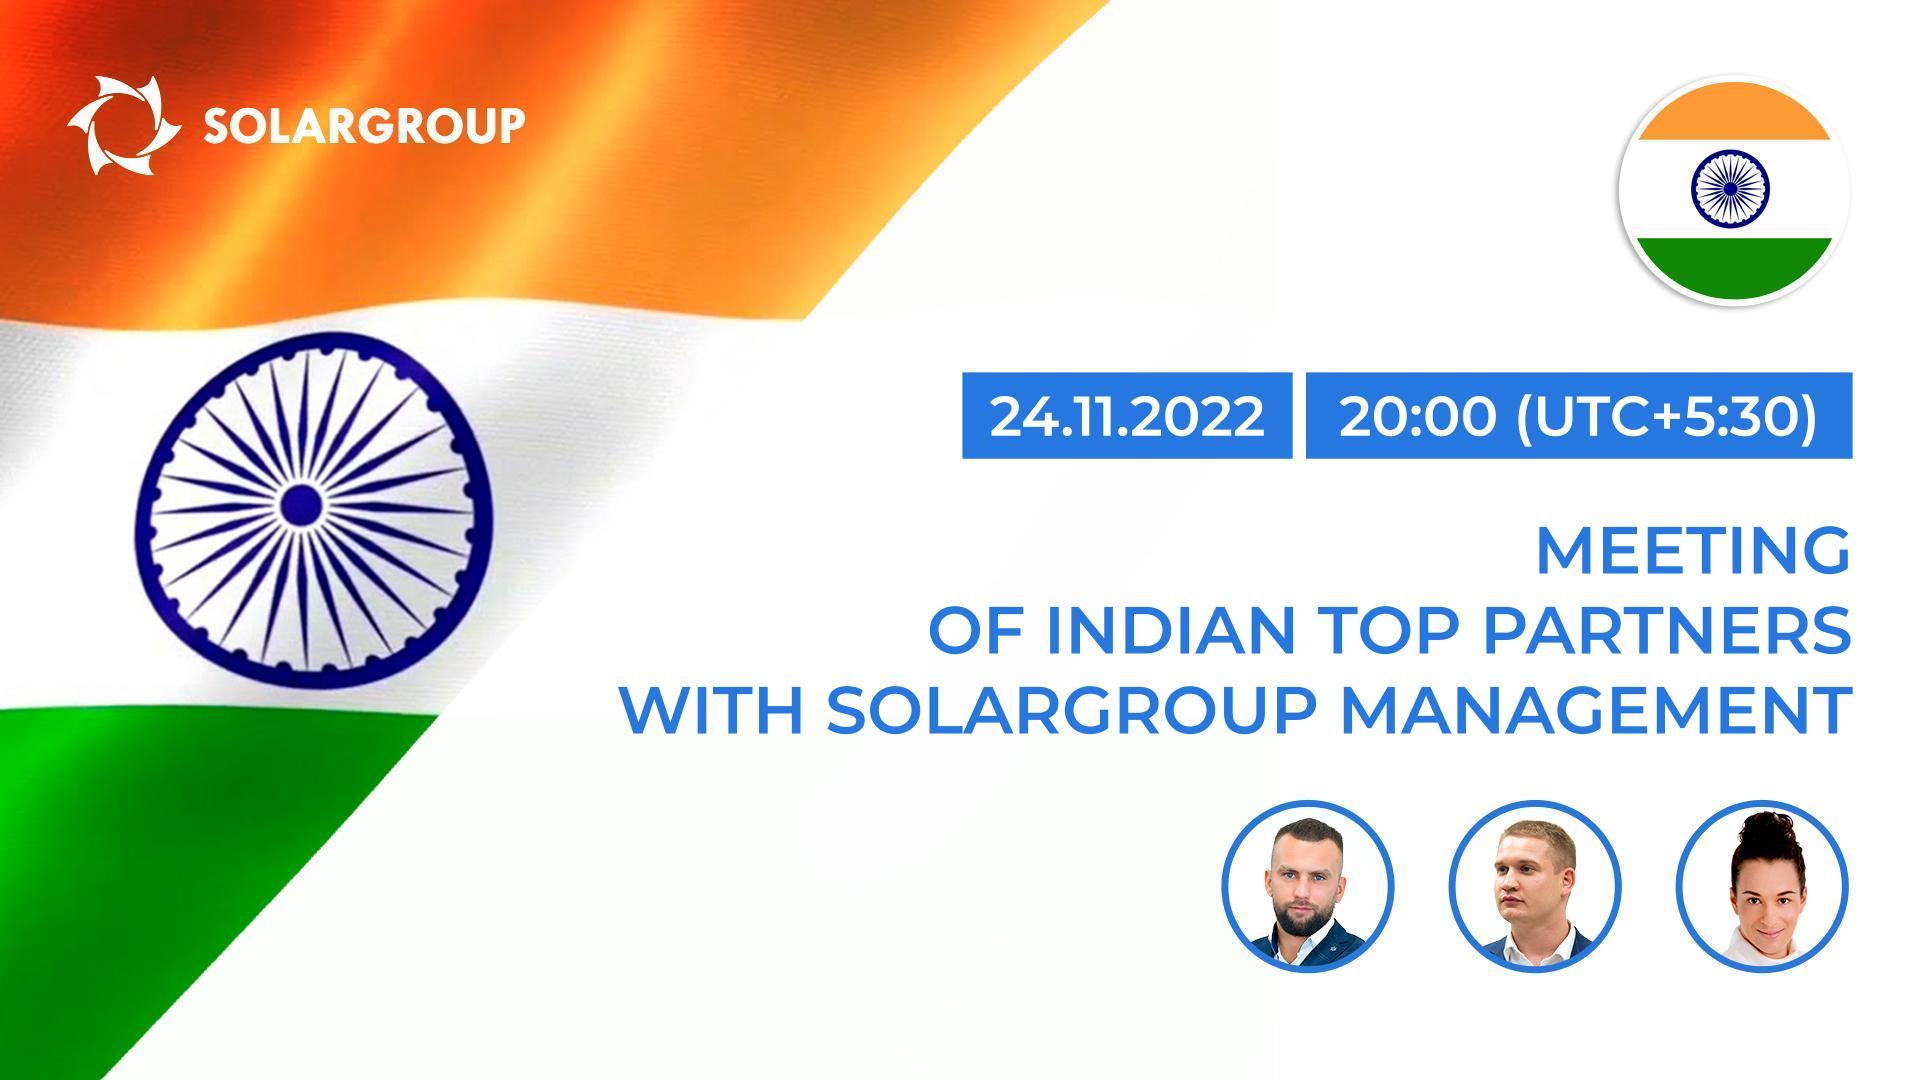 We invite you to a meeting of Indian TOP Partners with the management of SOLARGROUP!